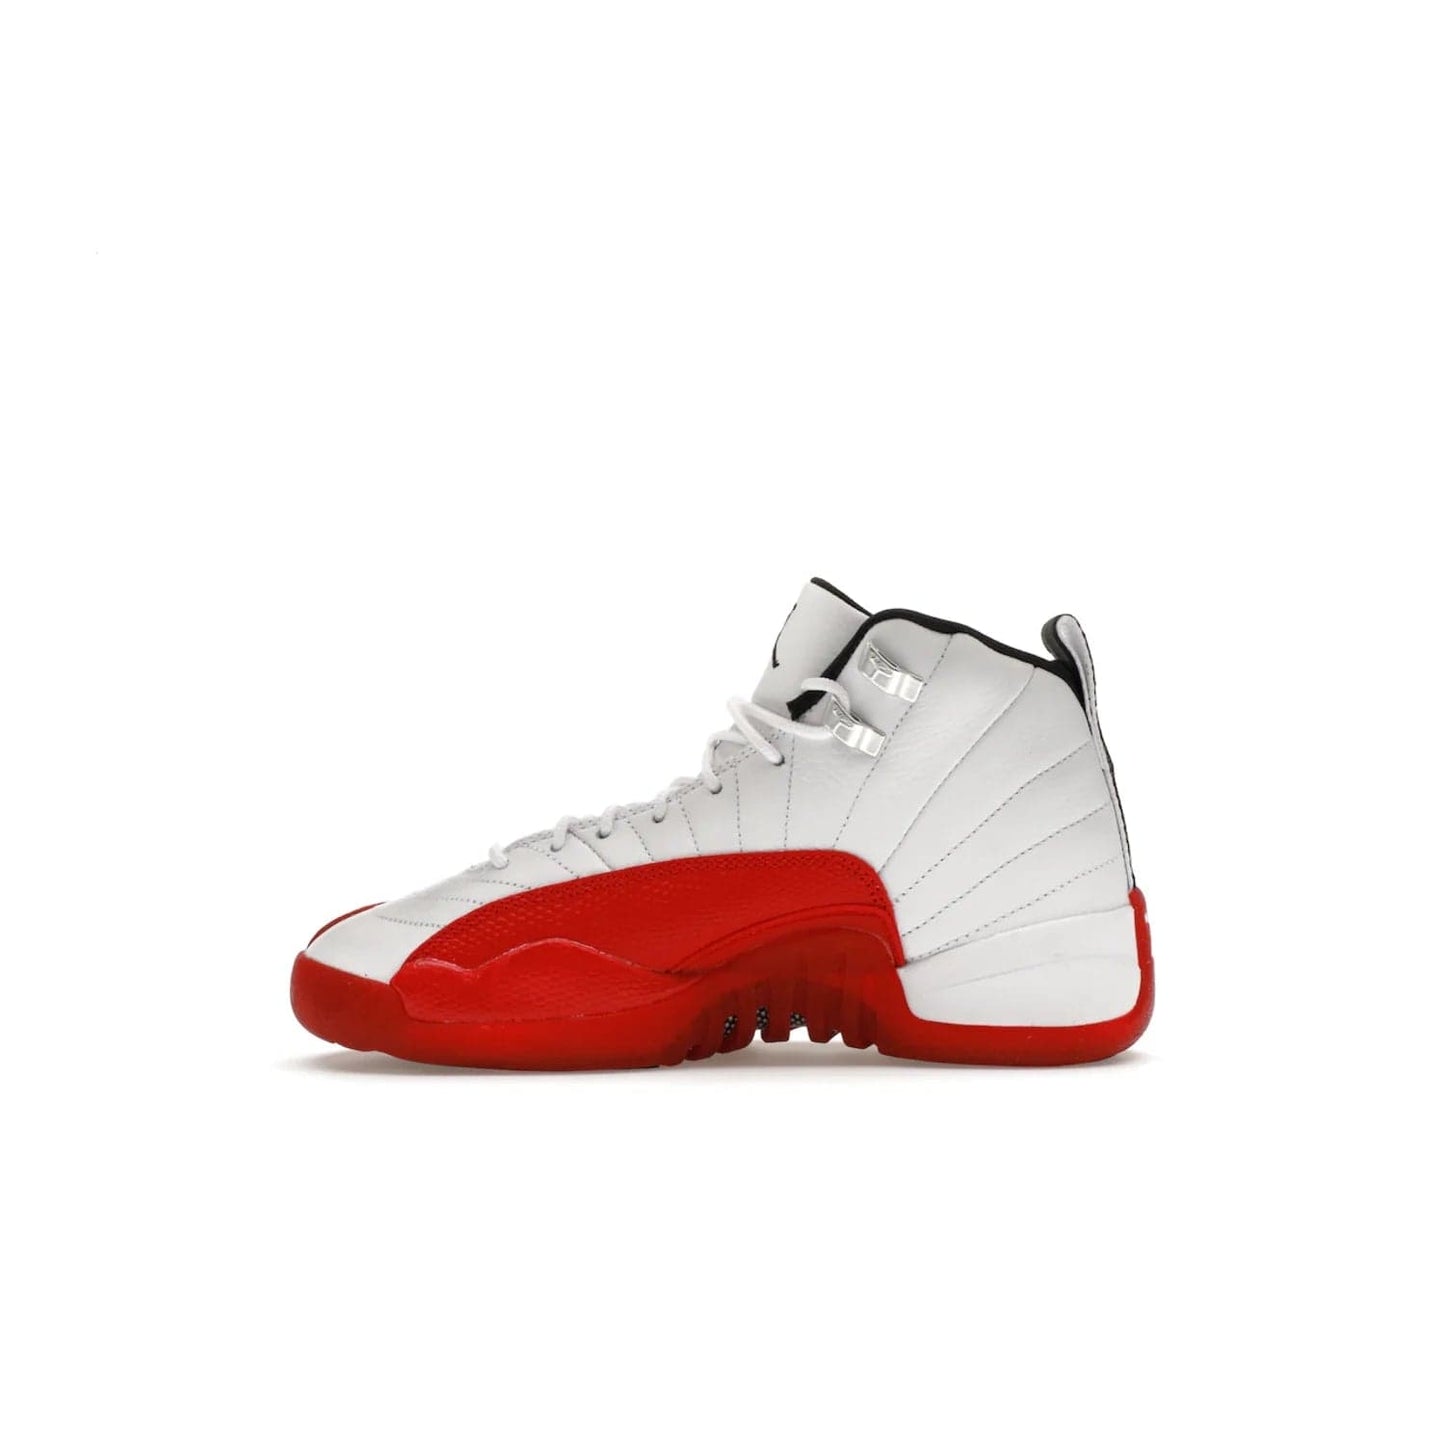 Jordan 12 Retro Cherry (2023) (GS) - Image 19 - Only at www.BallersClubKickz.com - Grab the Jordan 12 Retro Cherry (2023) (GS) and show off your signature style with these iconic kicks. Dressed in White, Black and Varsity Red, these timeless kicks are sure to turn heads. Available October 28, 2023.